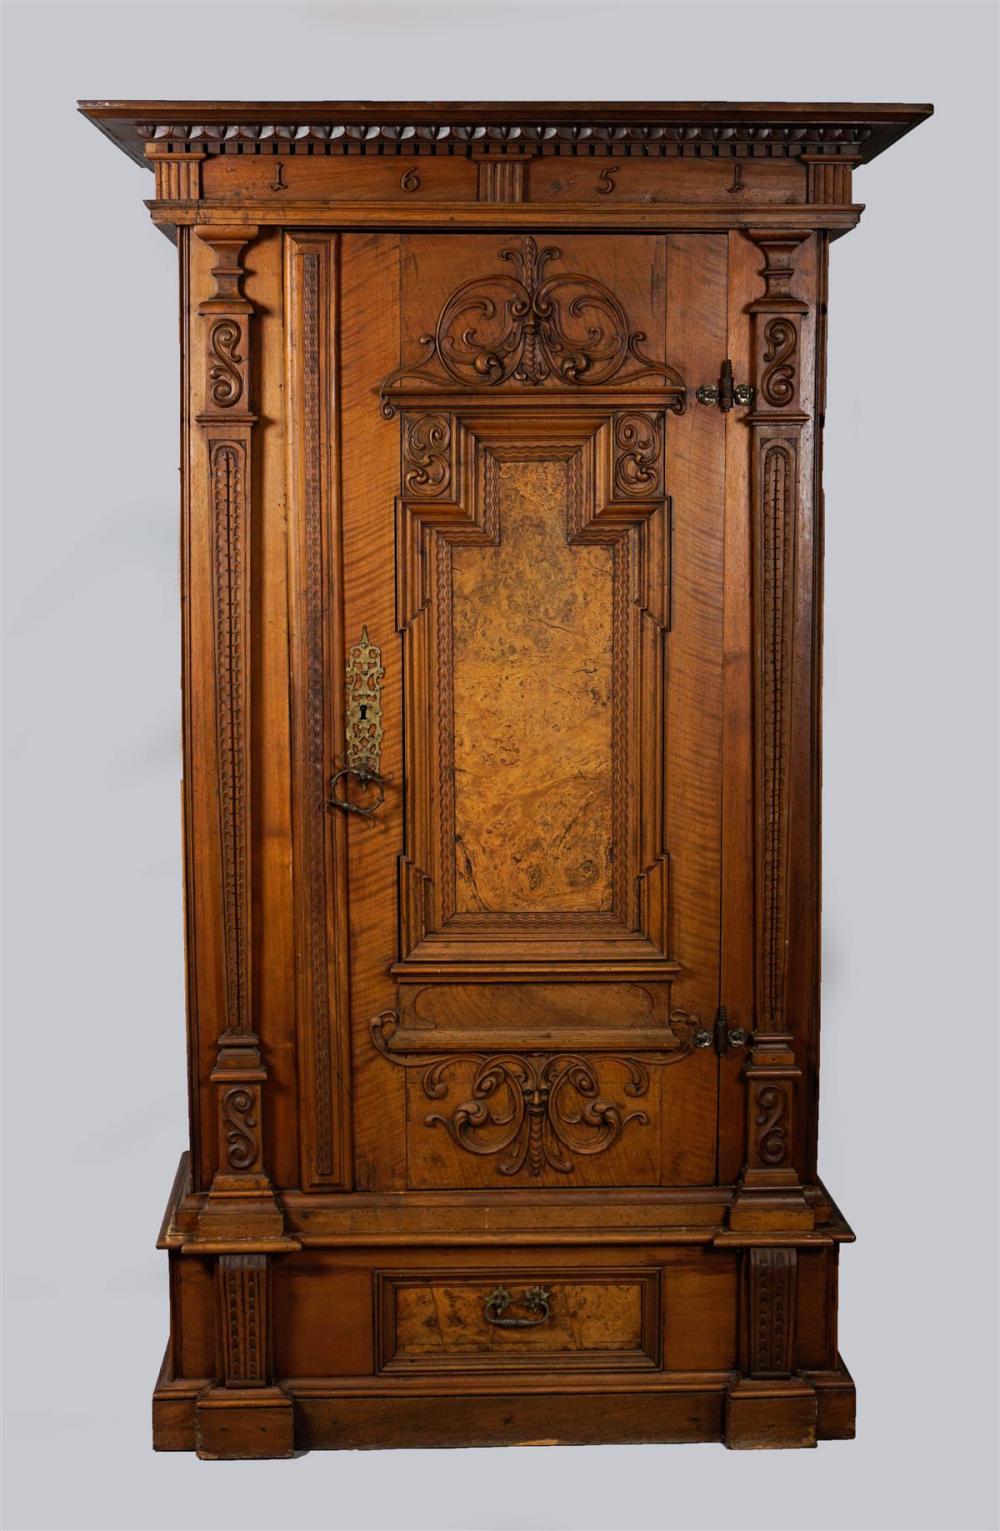 NORTH GERMAN BAROQUE STYLE FRUITWOOD